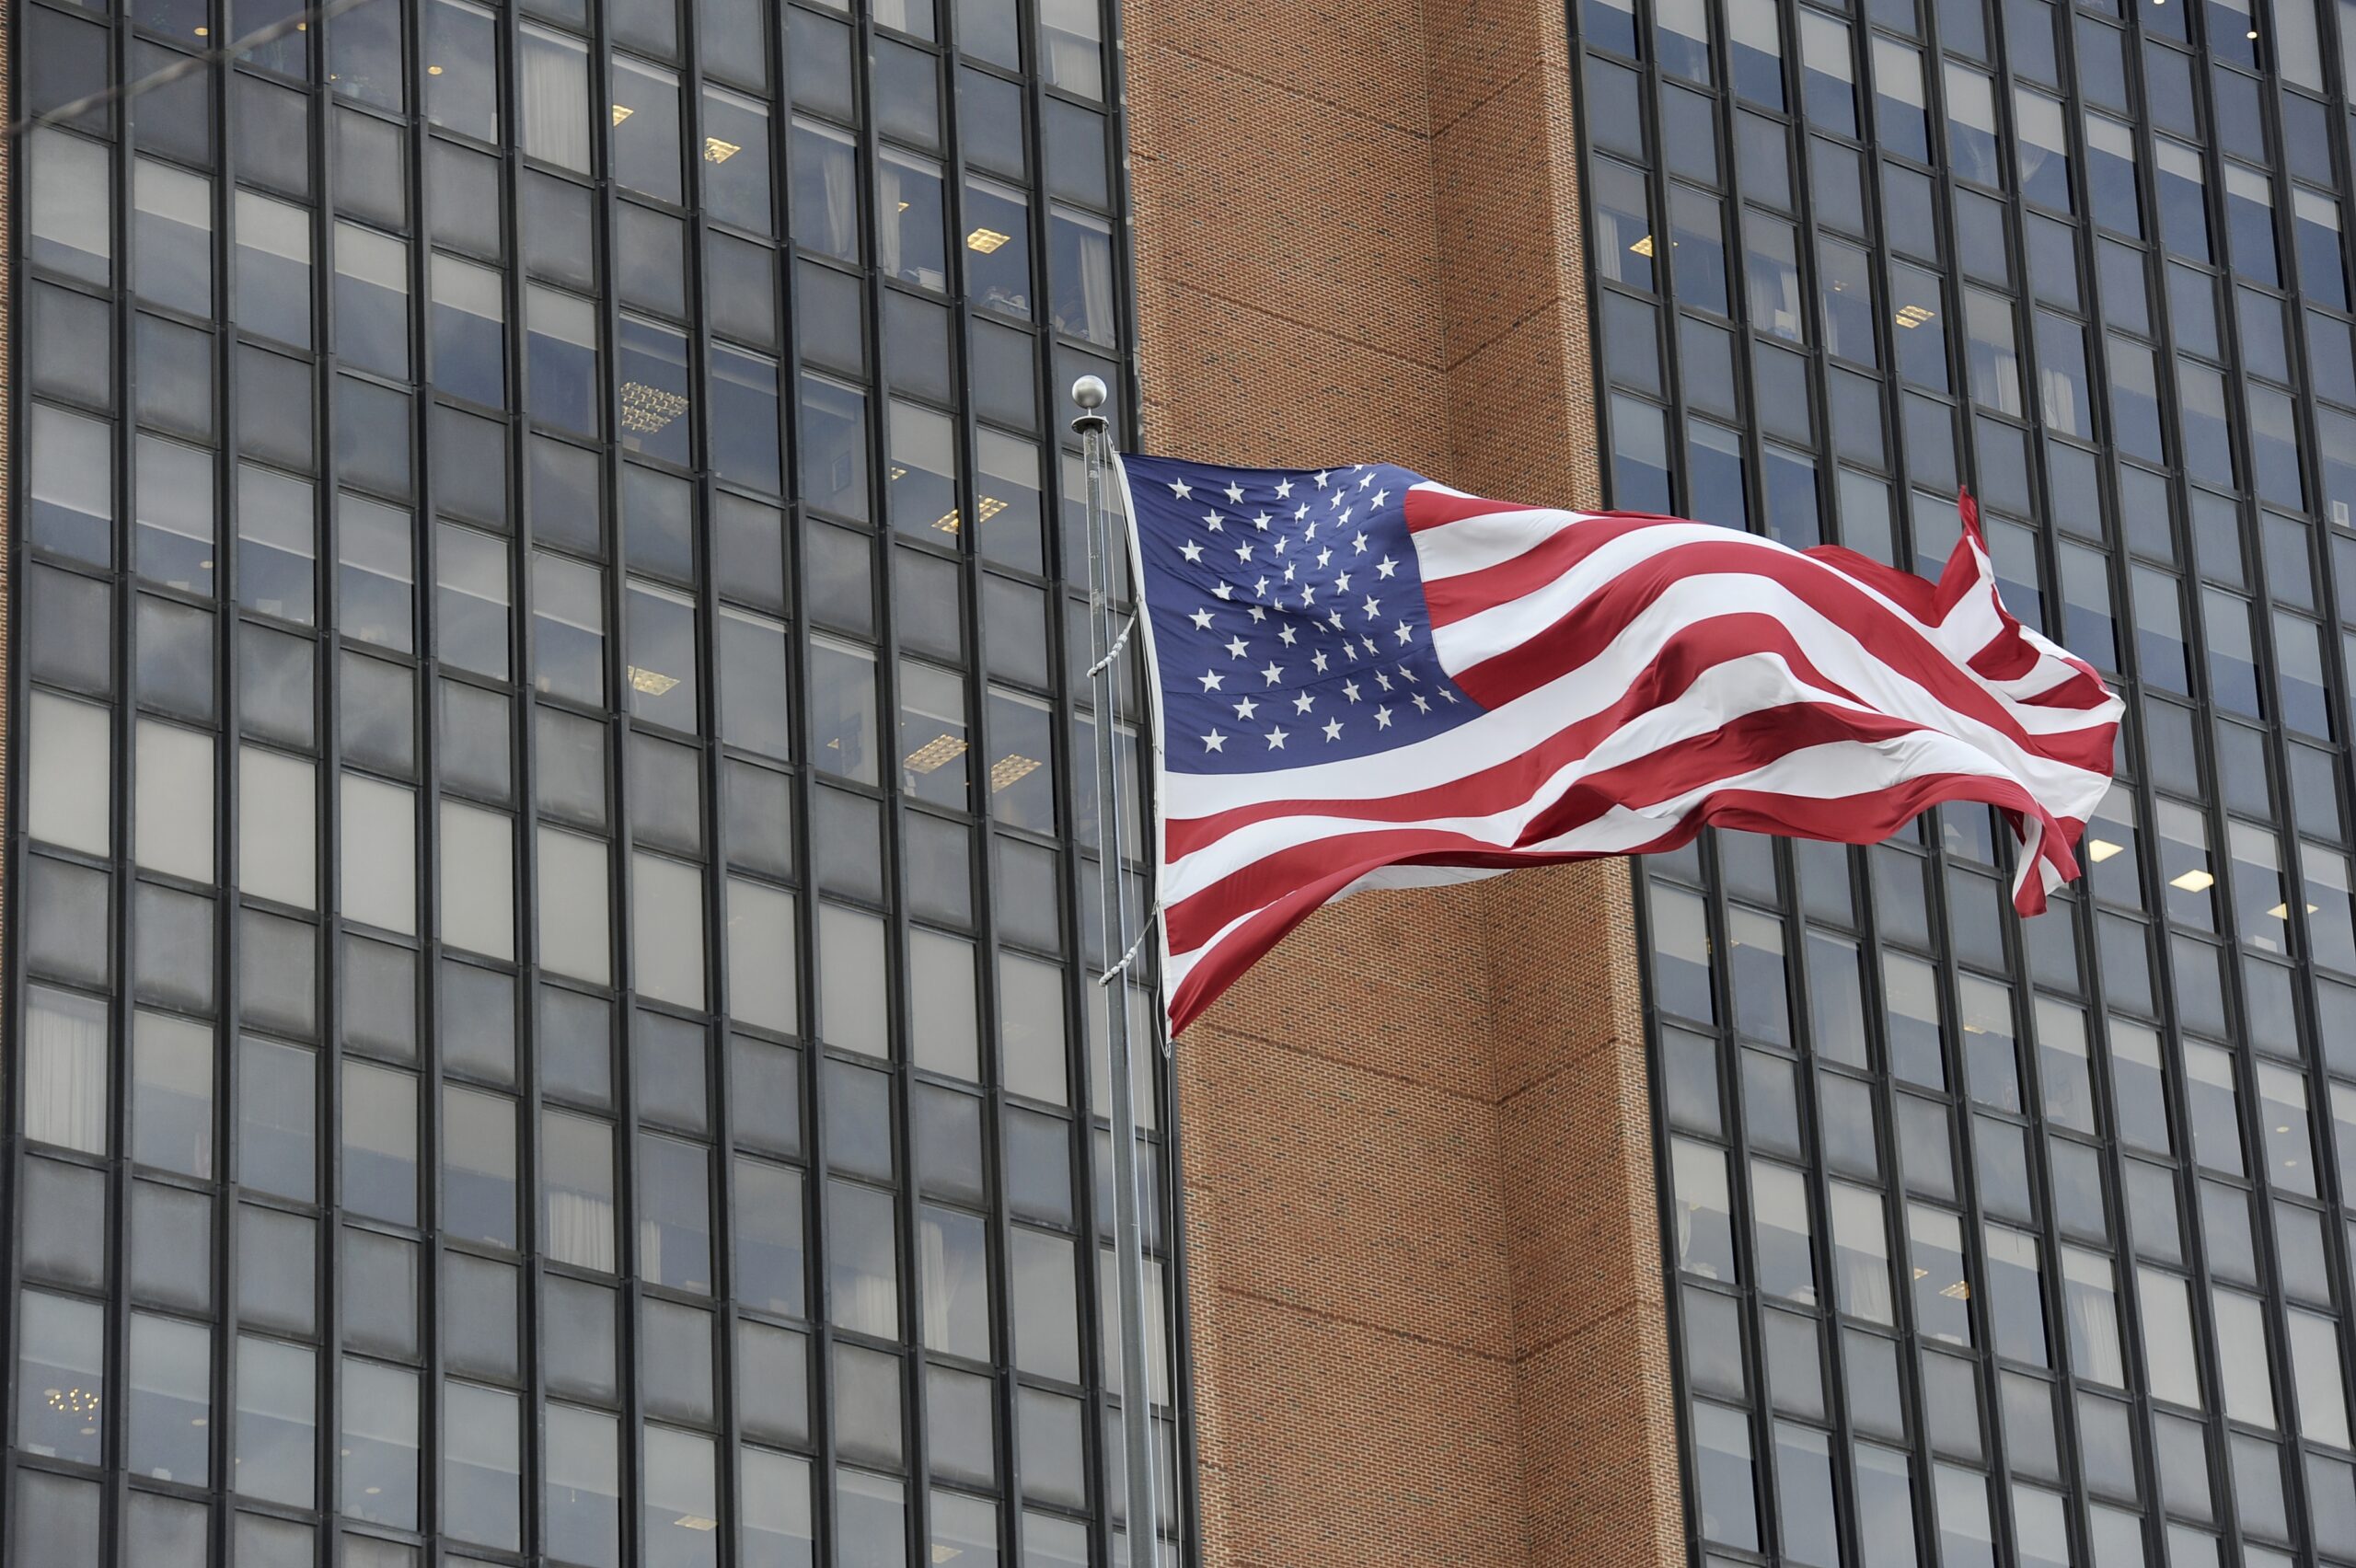 The American flag is seen at the James A. Byrne United States Courthouse